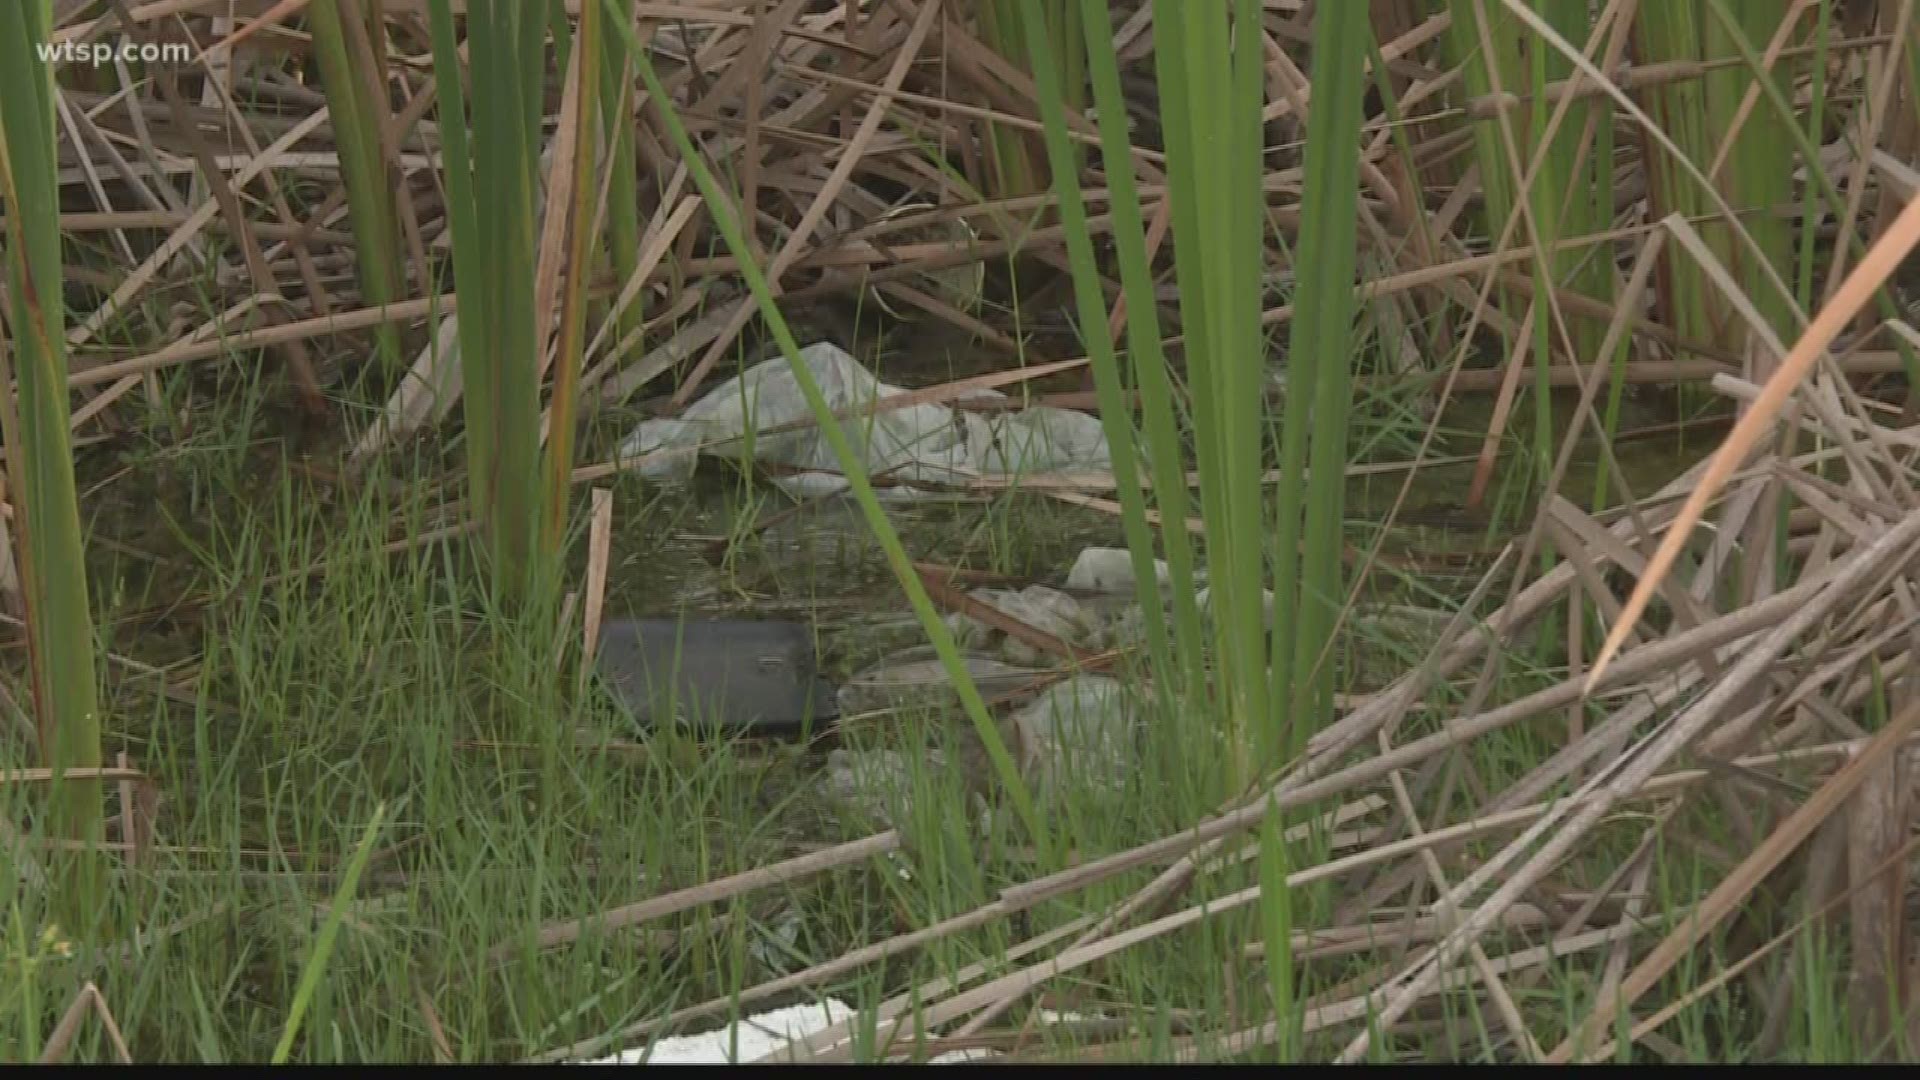 The Pinellas County Sheriff’s Office said it was investigating after a body was found.

Deputies said the body was found near a retention pond behind a Seminole Winn Dixie Sunday afternoon.

Law enforcement said they weren’t sure how long the body had been there because of being exposed to the outside elements.

The body will be taken to the Medical Examiner’s office to find out manner and cause of death.